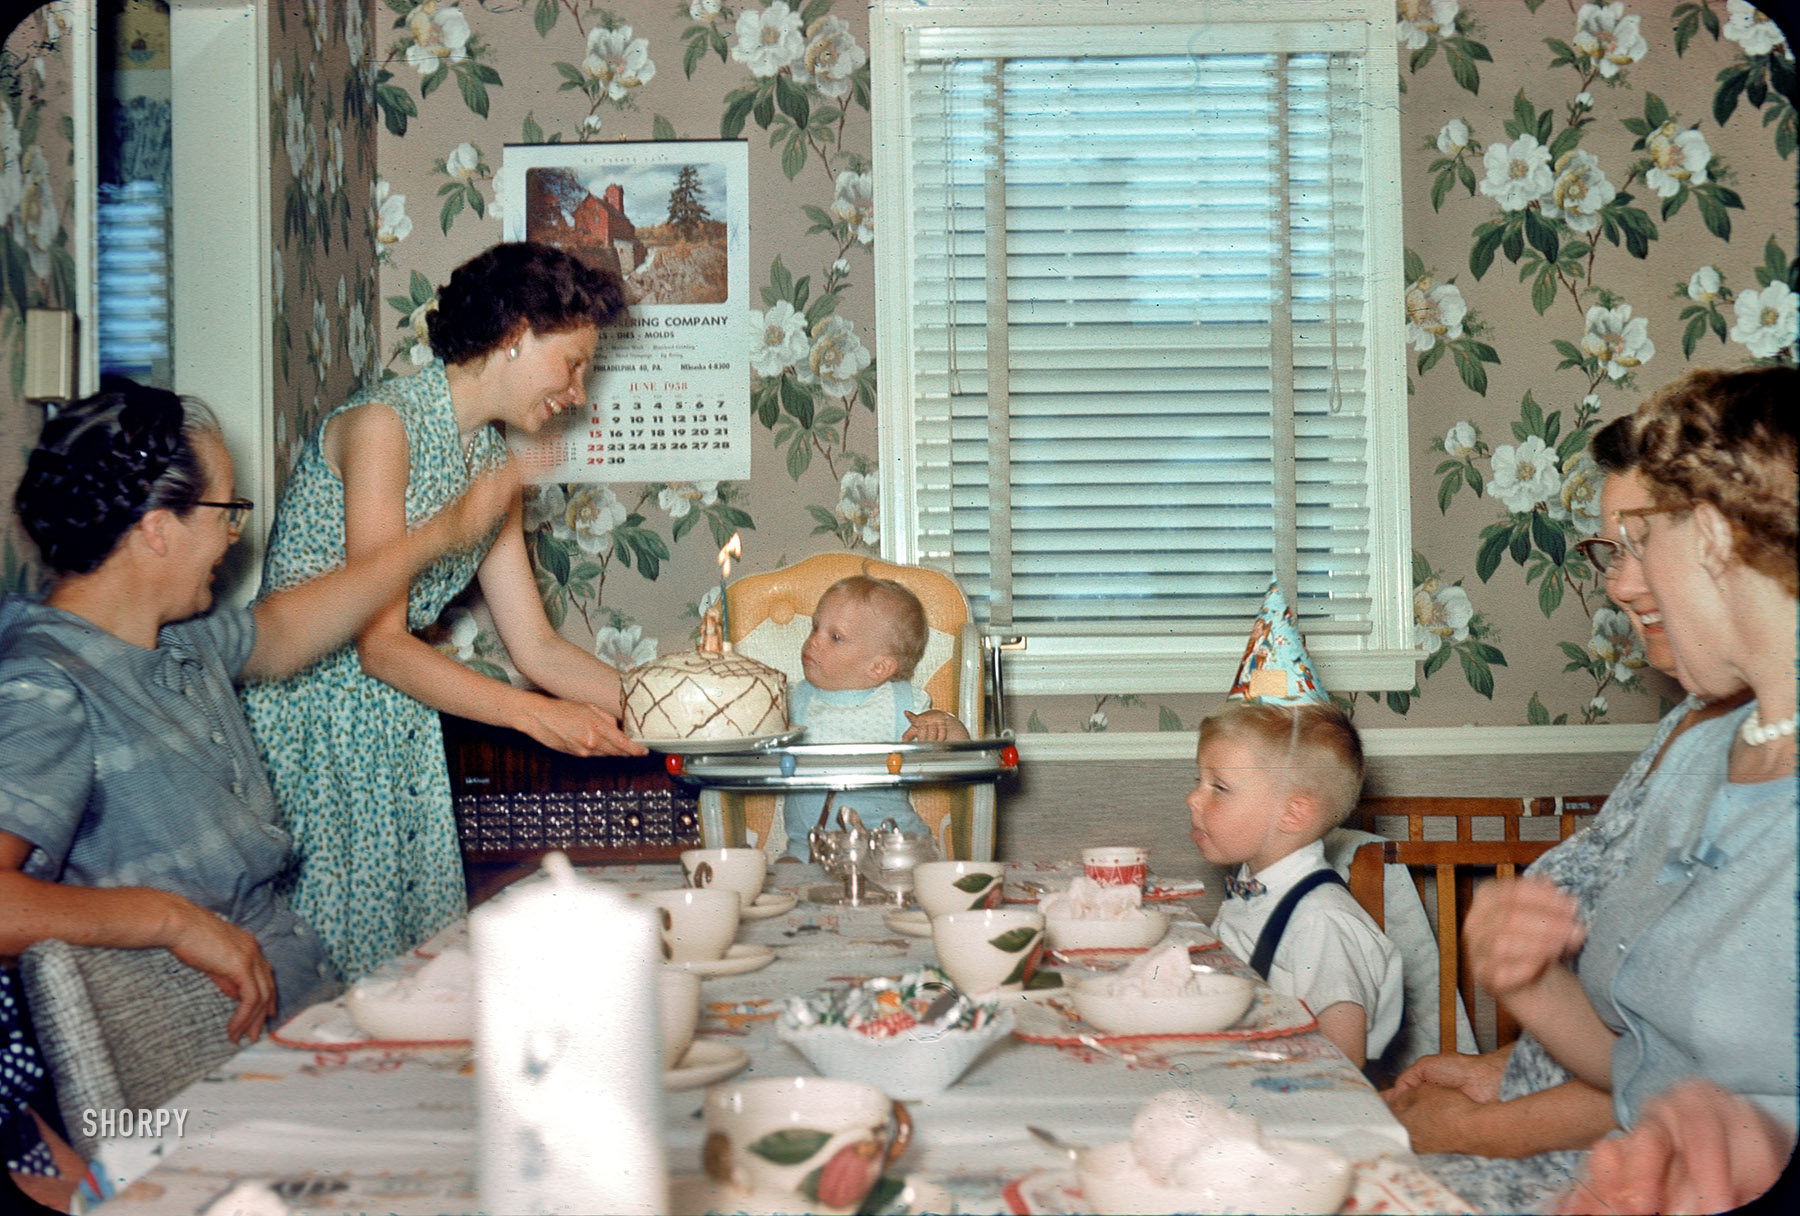 June 1958, somewhere in Pennsylvania. This begins a new series of Kodachromes that I found on eBay. Happy Birthday from Shorpy! View full size.